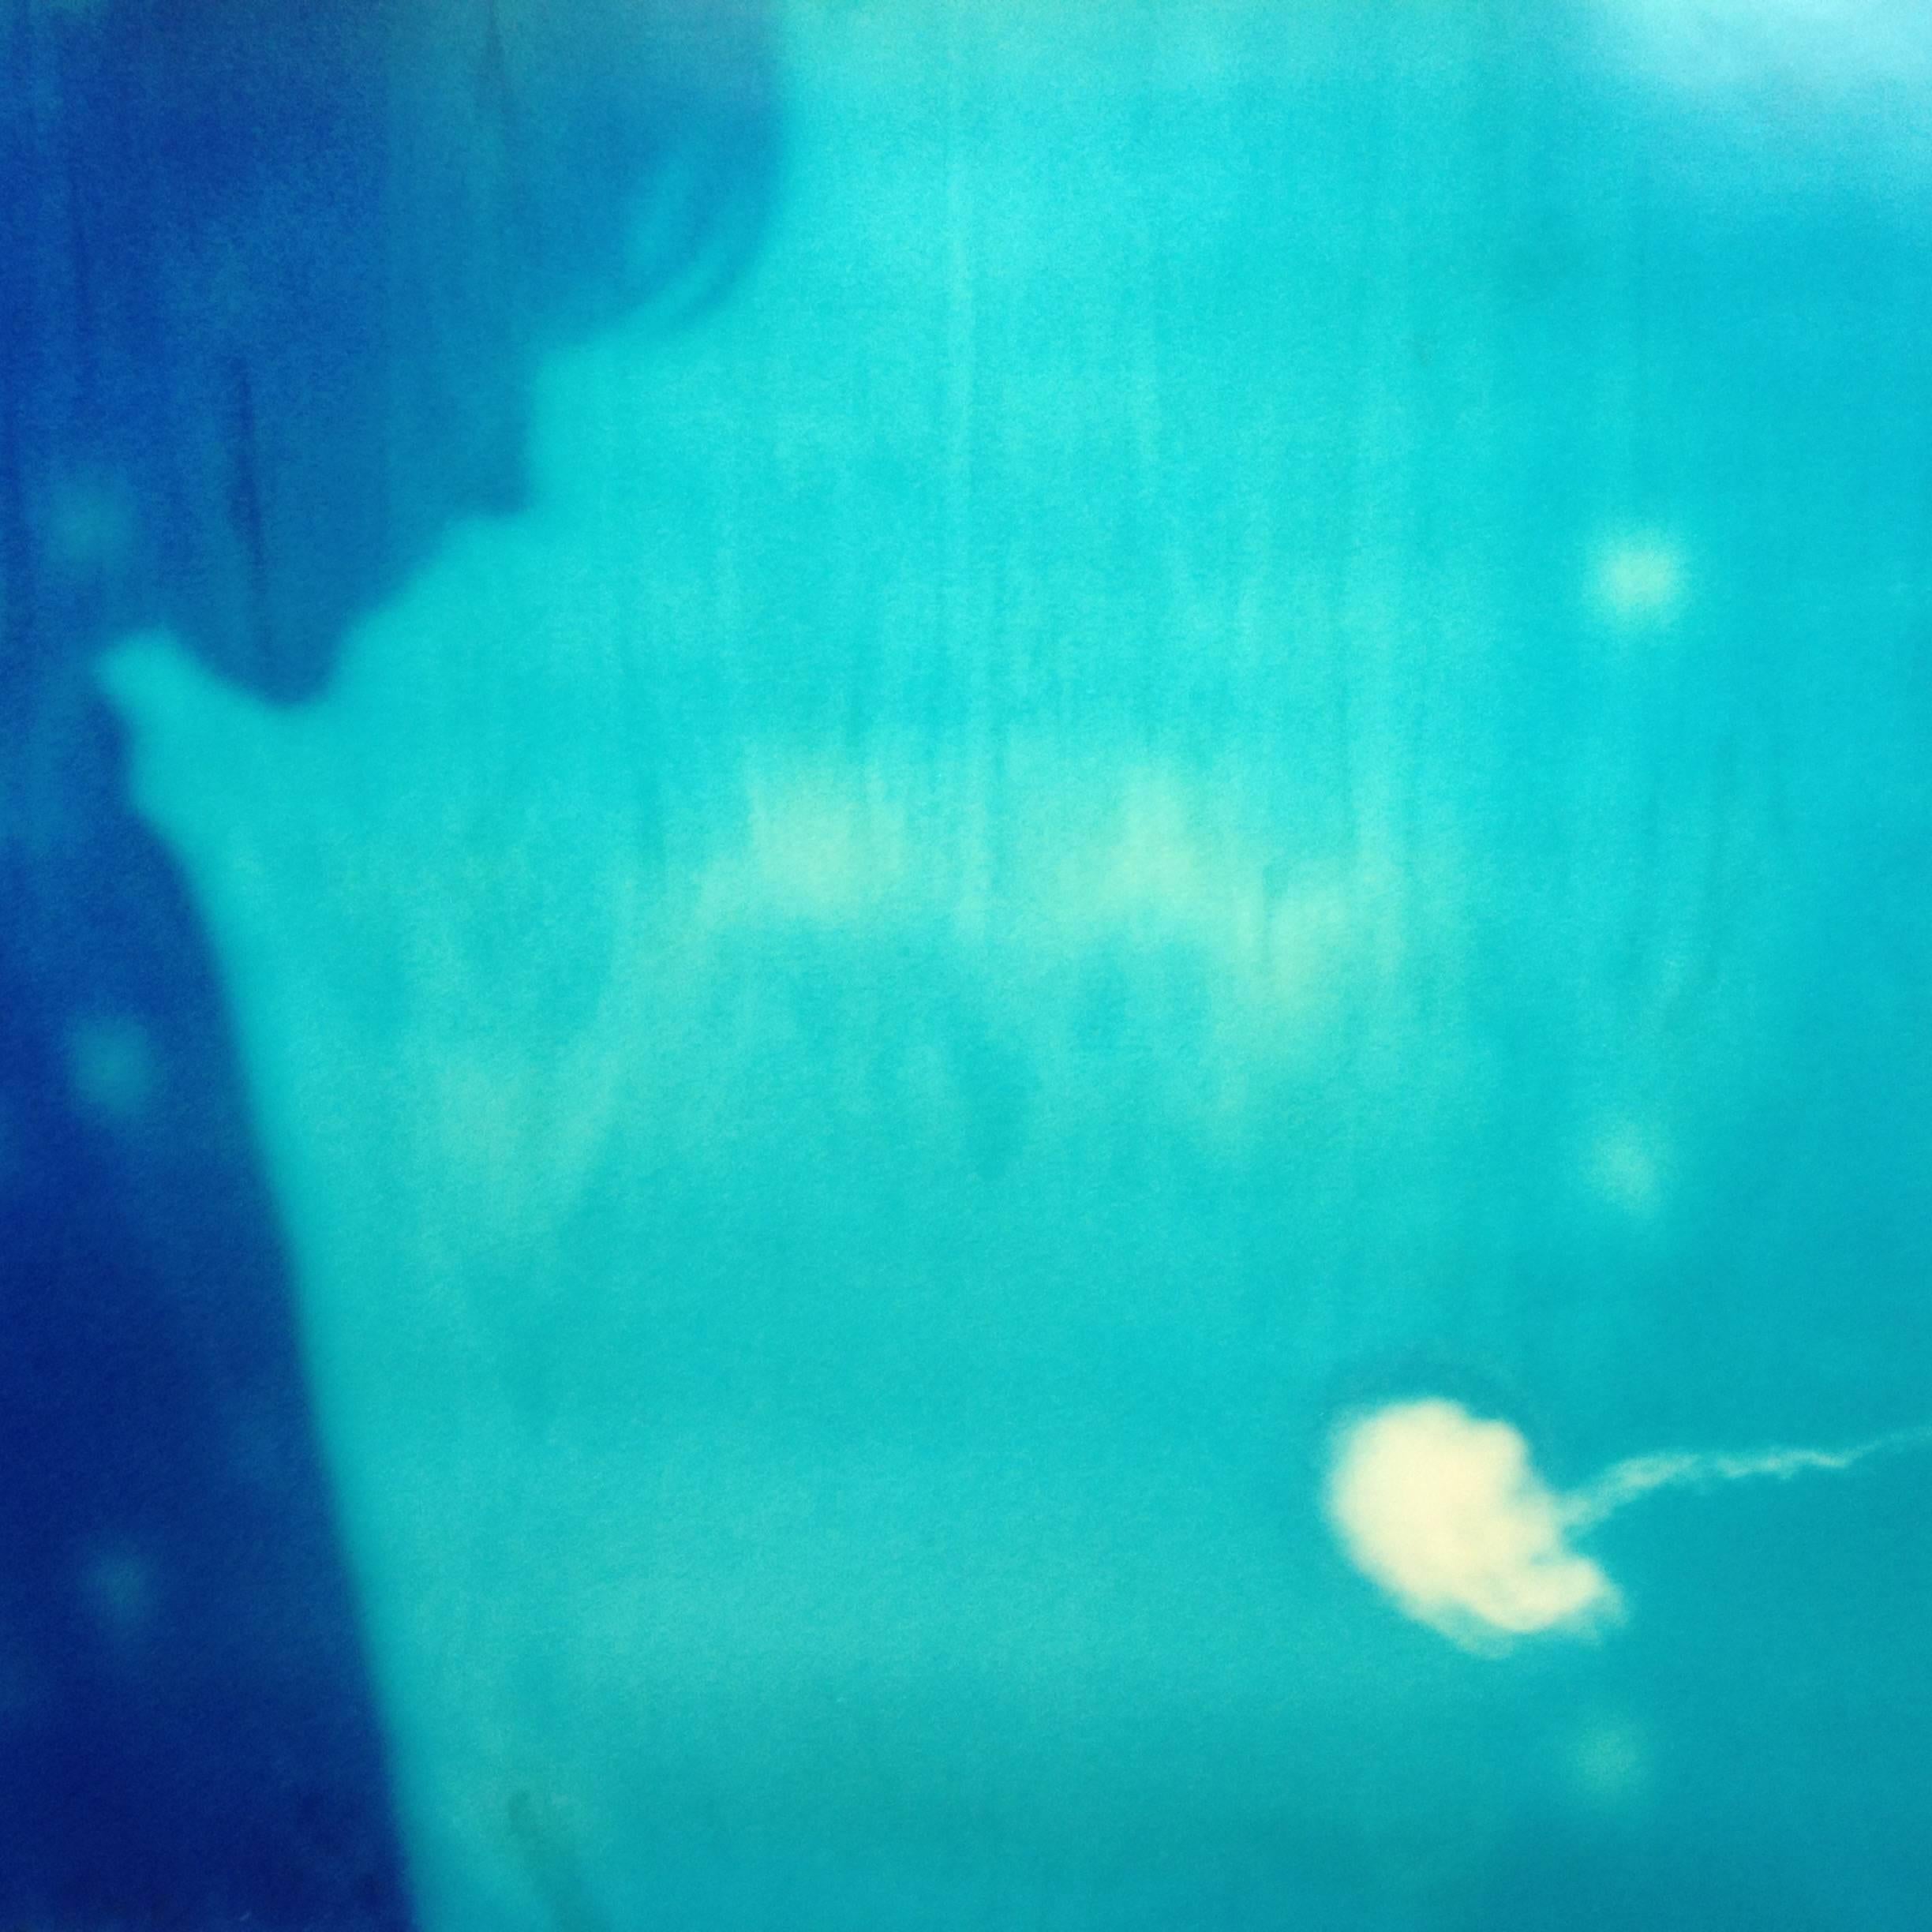 Stefanie Schneider Color Photograph - Jelly Fish - Contemporary, Expired, Polaroid, Photograph, Abstract, Ryan Gosling